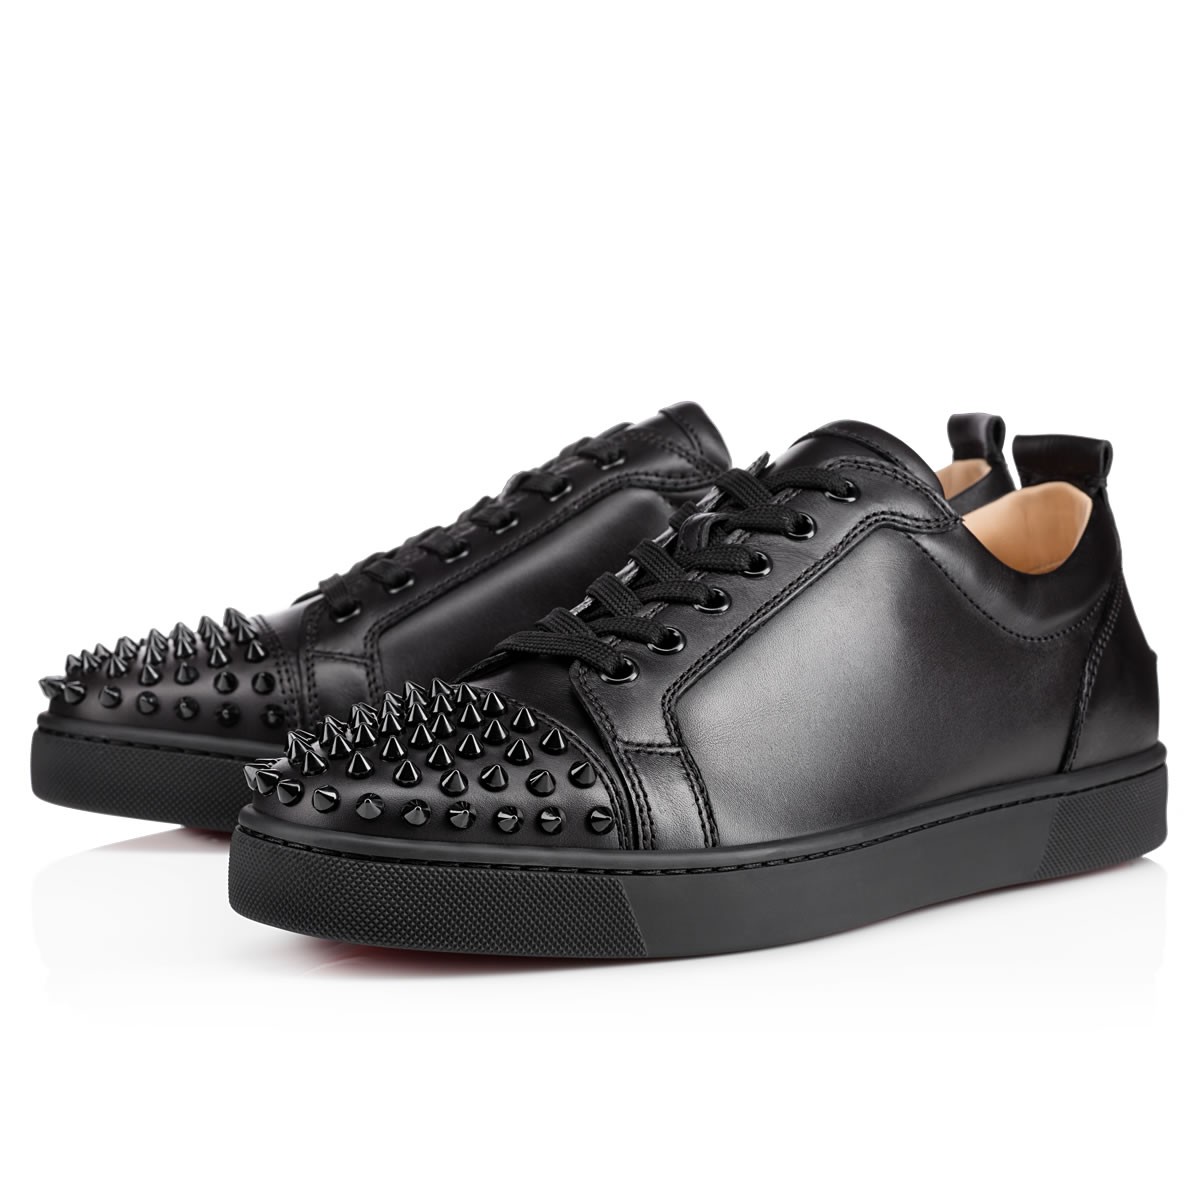 NEW CHRISTIAN LOUBOUTIN LOUIS STRASS SHOES 42.5 PYTHON SHOES